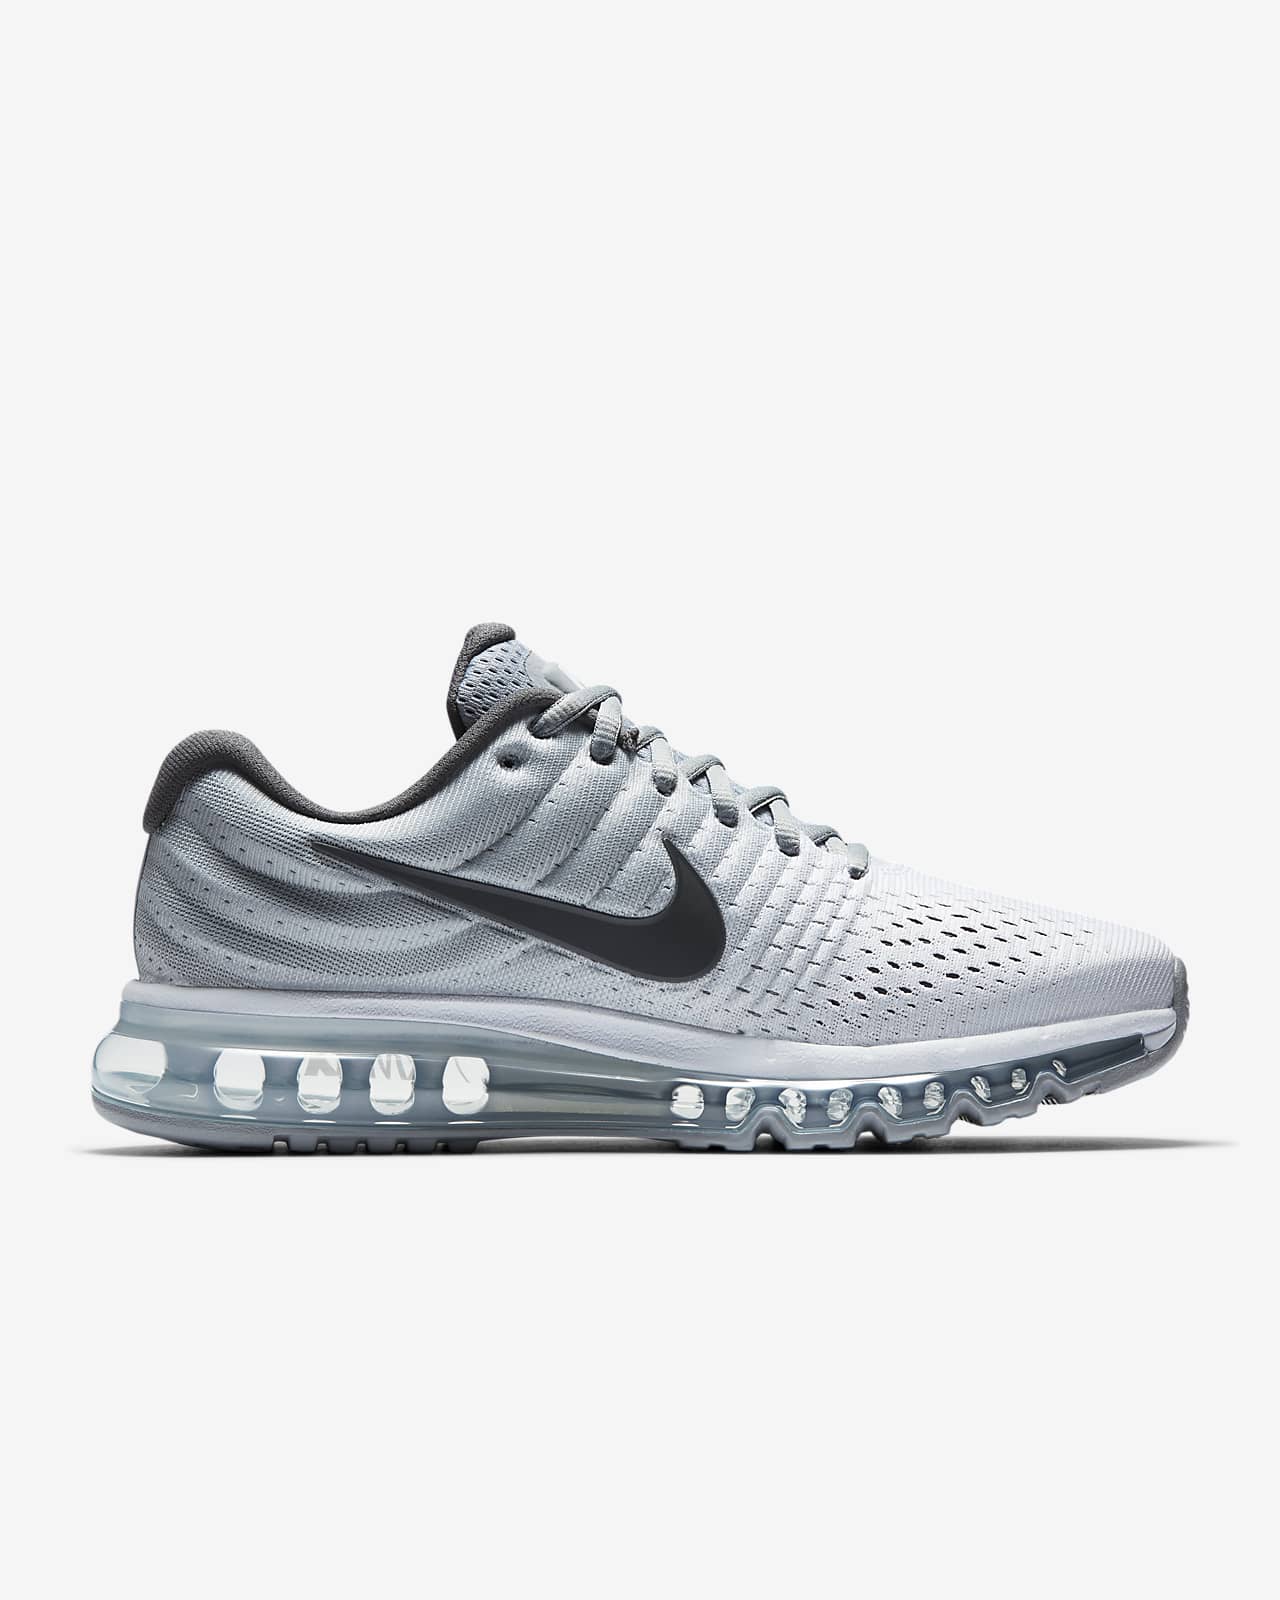 Collective Malignant punch Nike Air Max 2017 Men's Shoes. Nike.com